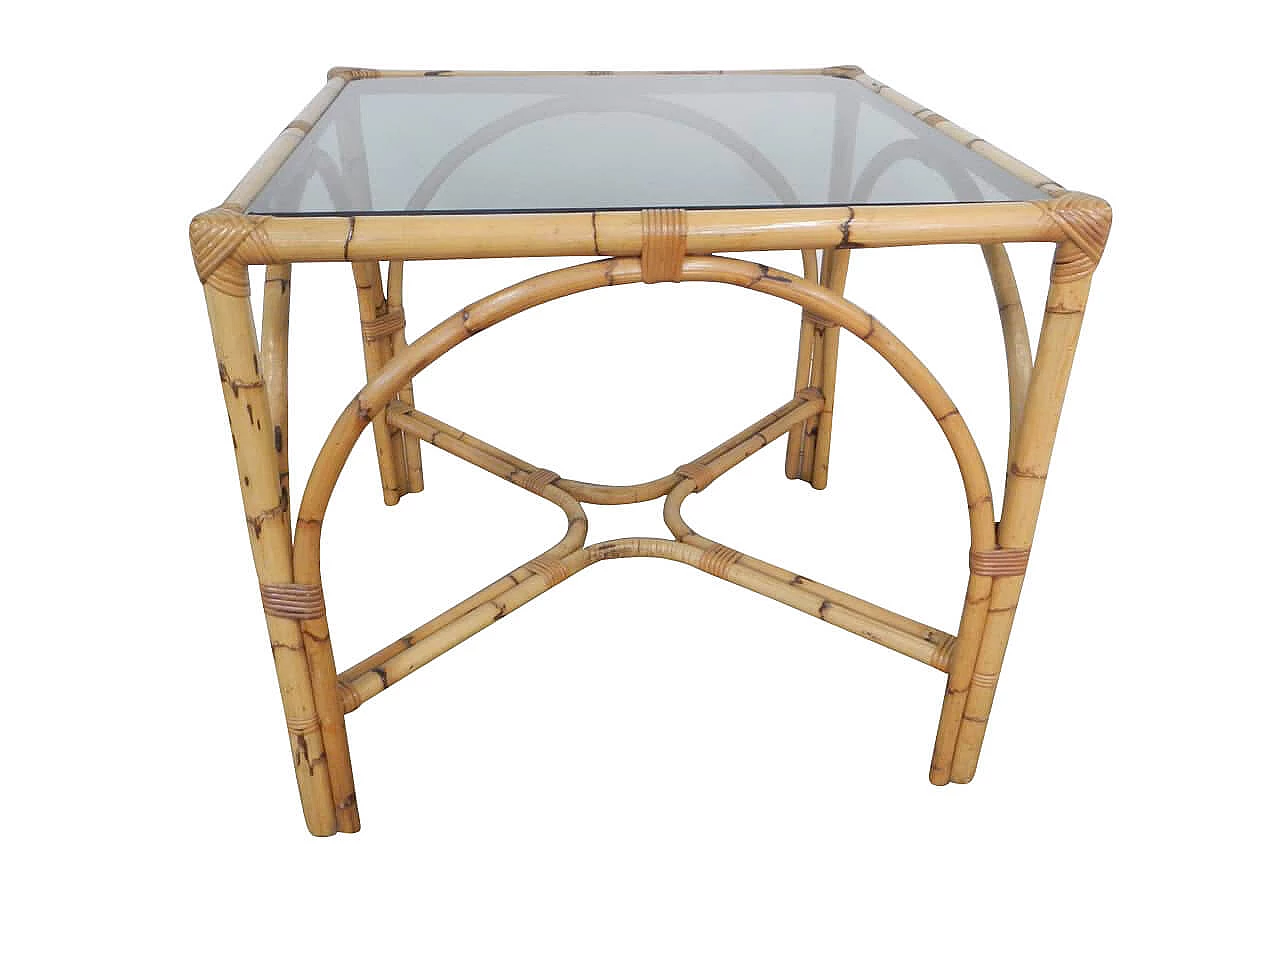 Wicker table with glass top, 1970s 1180905